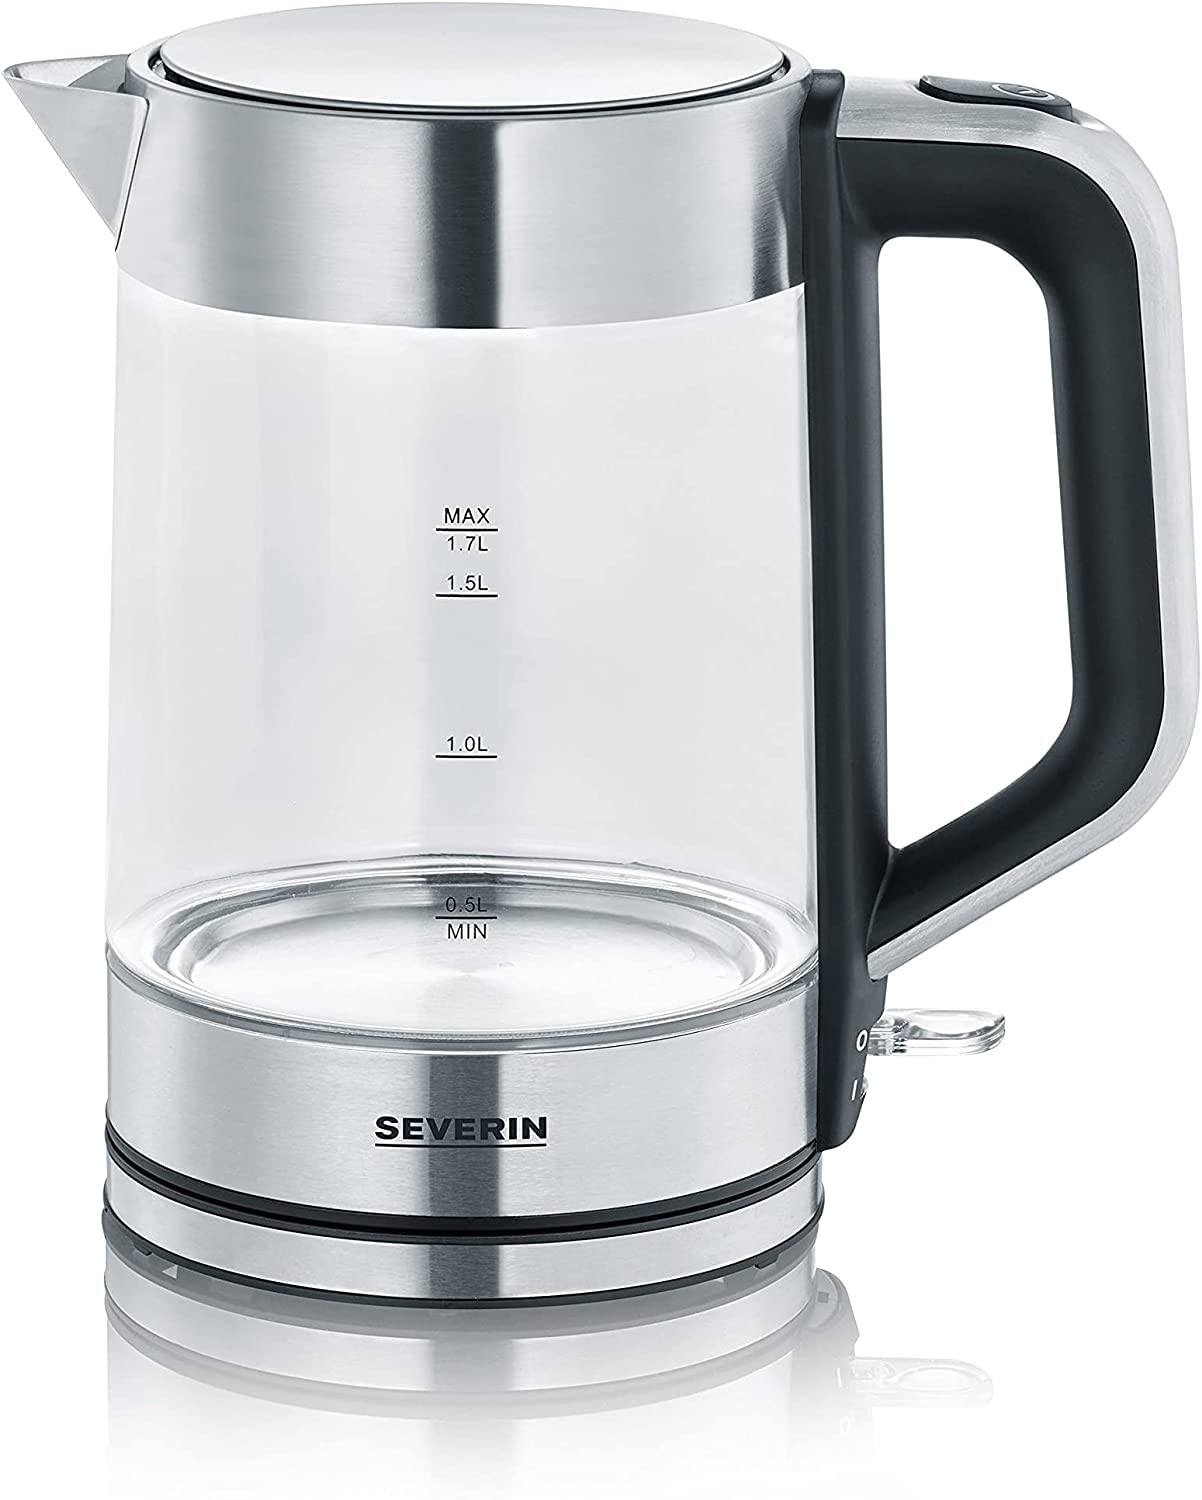 Severin Glass Electric Kettle 1.7 L 2200w Black, Stainless Steel